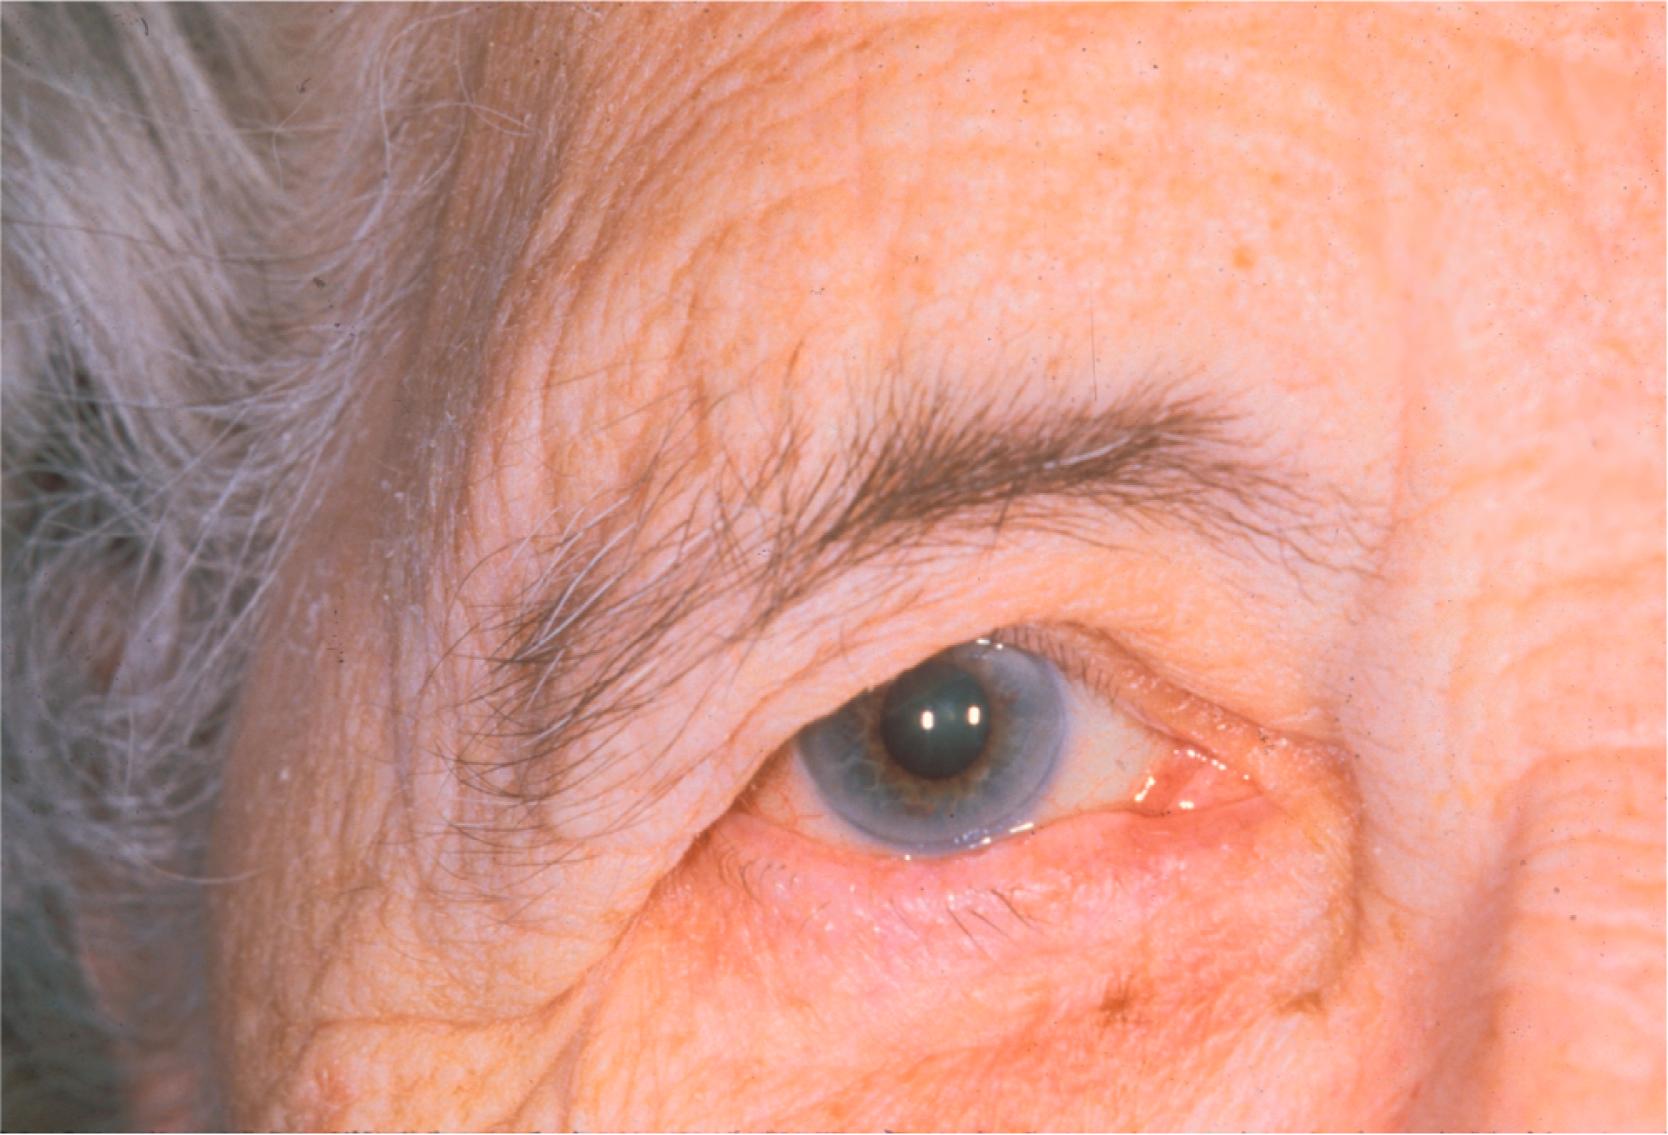 Figure 6.4, Temporal eyebrow droop is one of the most common, yet unappreciated, causes of visual loss.